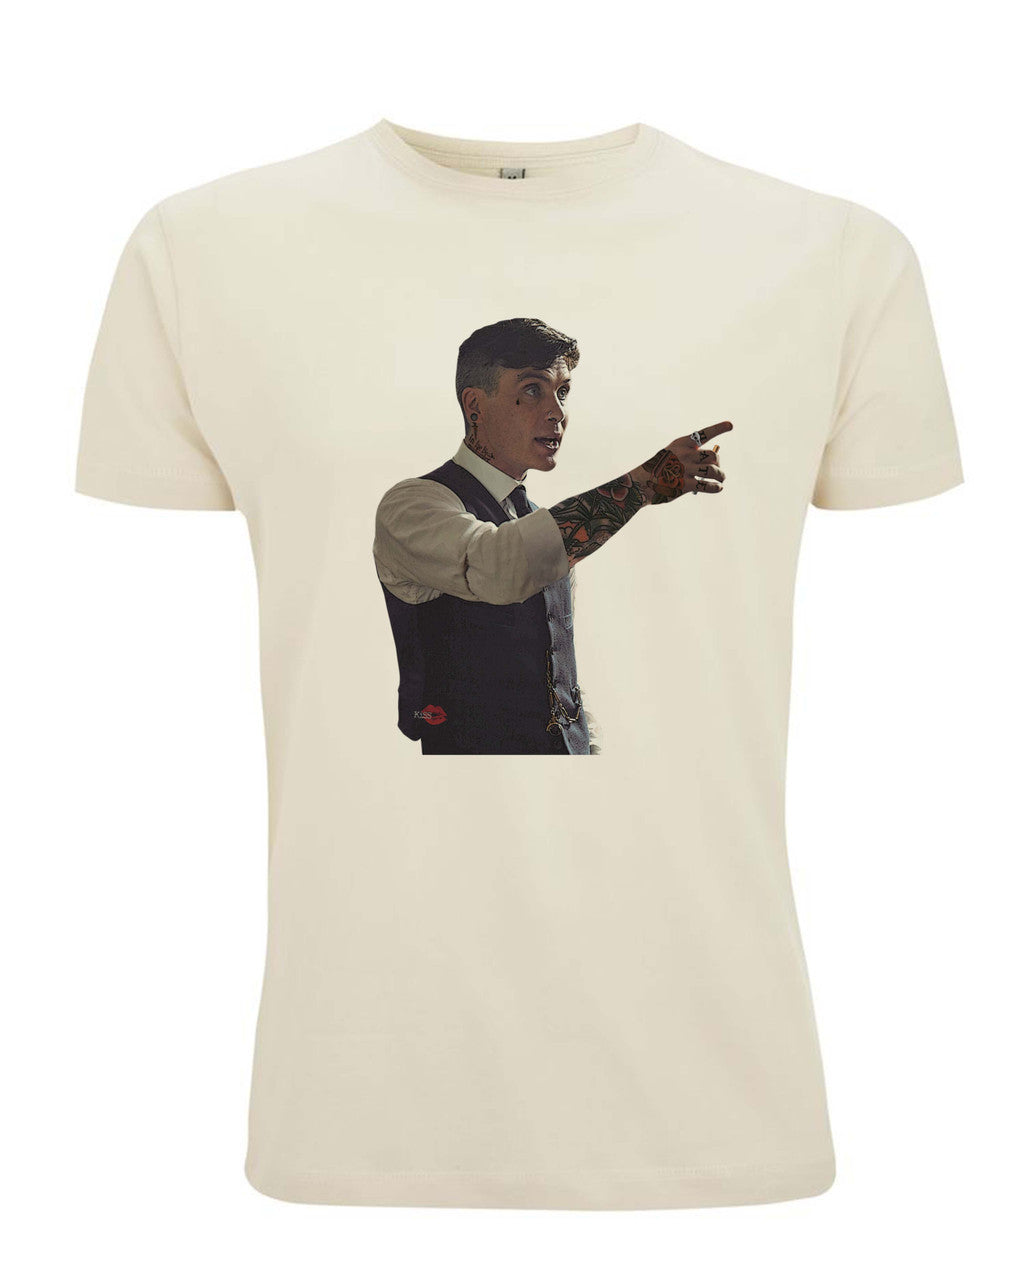 Tattooed Tommy KiSS T-Shirt - Shelby Peaky Blinders inspired - By Order - Gangster Cillian Murphy